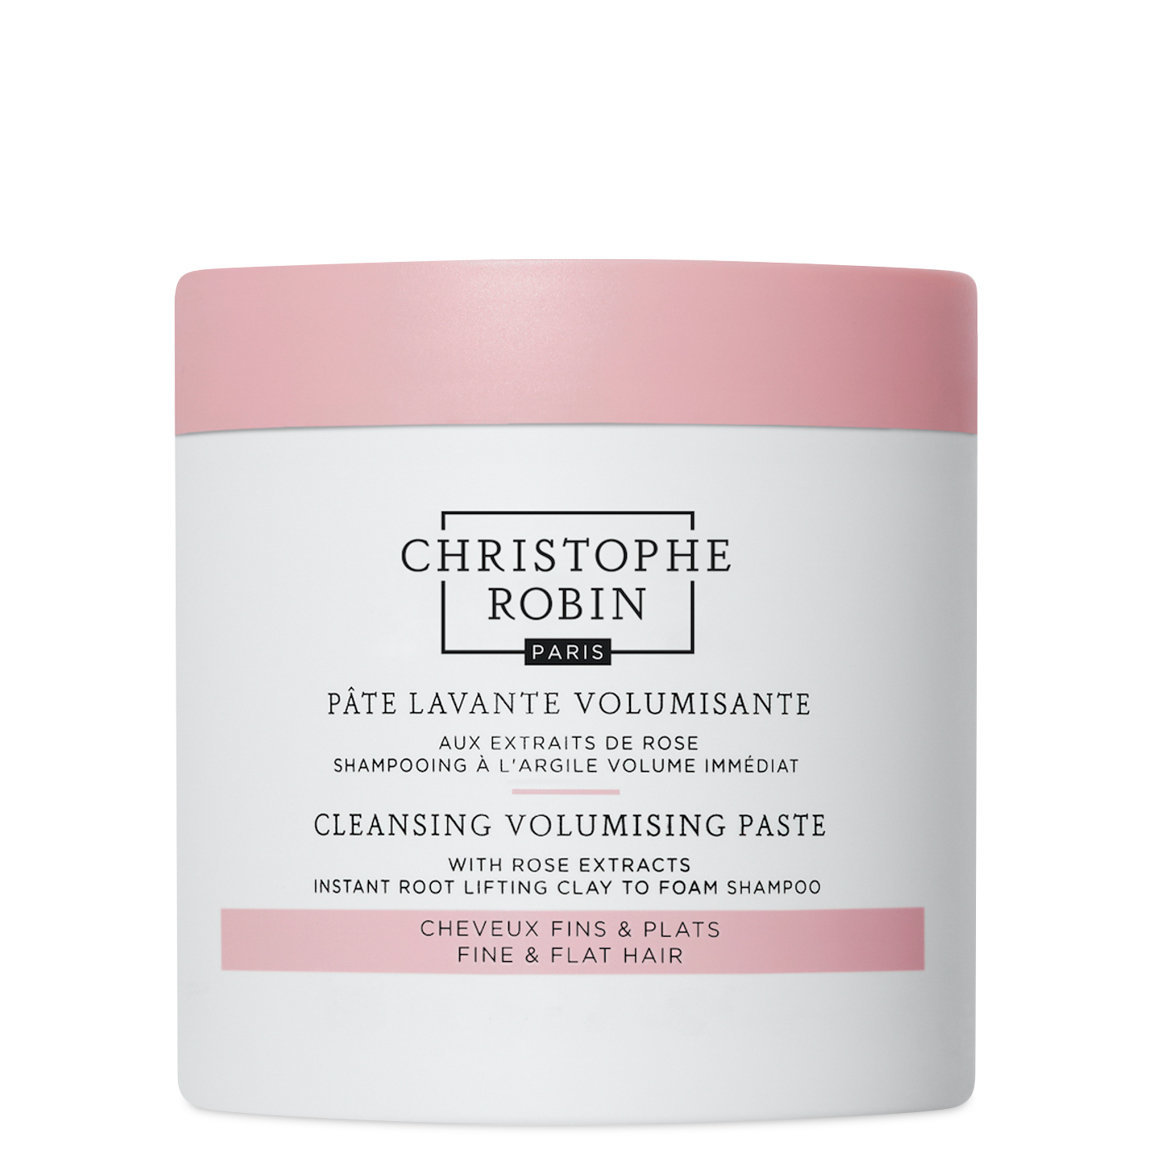 Christophe Robin Cleansing Volumizing Paste with Pure Rassoul Clay and Rose Extracts 250 ml alternative view 1 - product swatch.